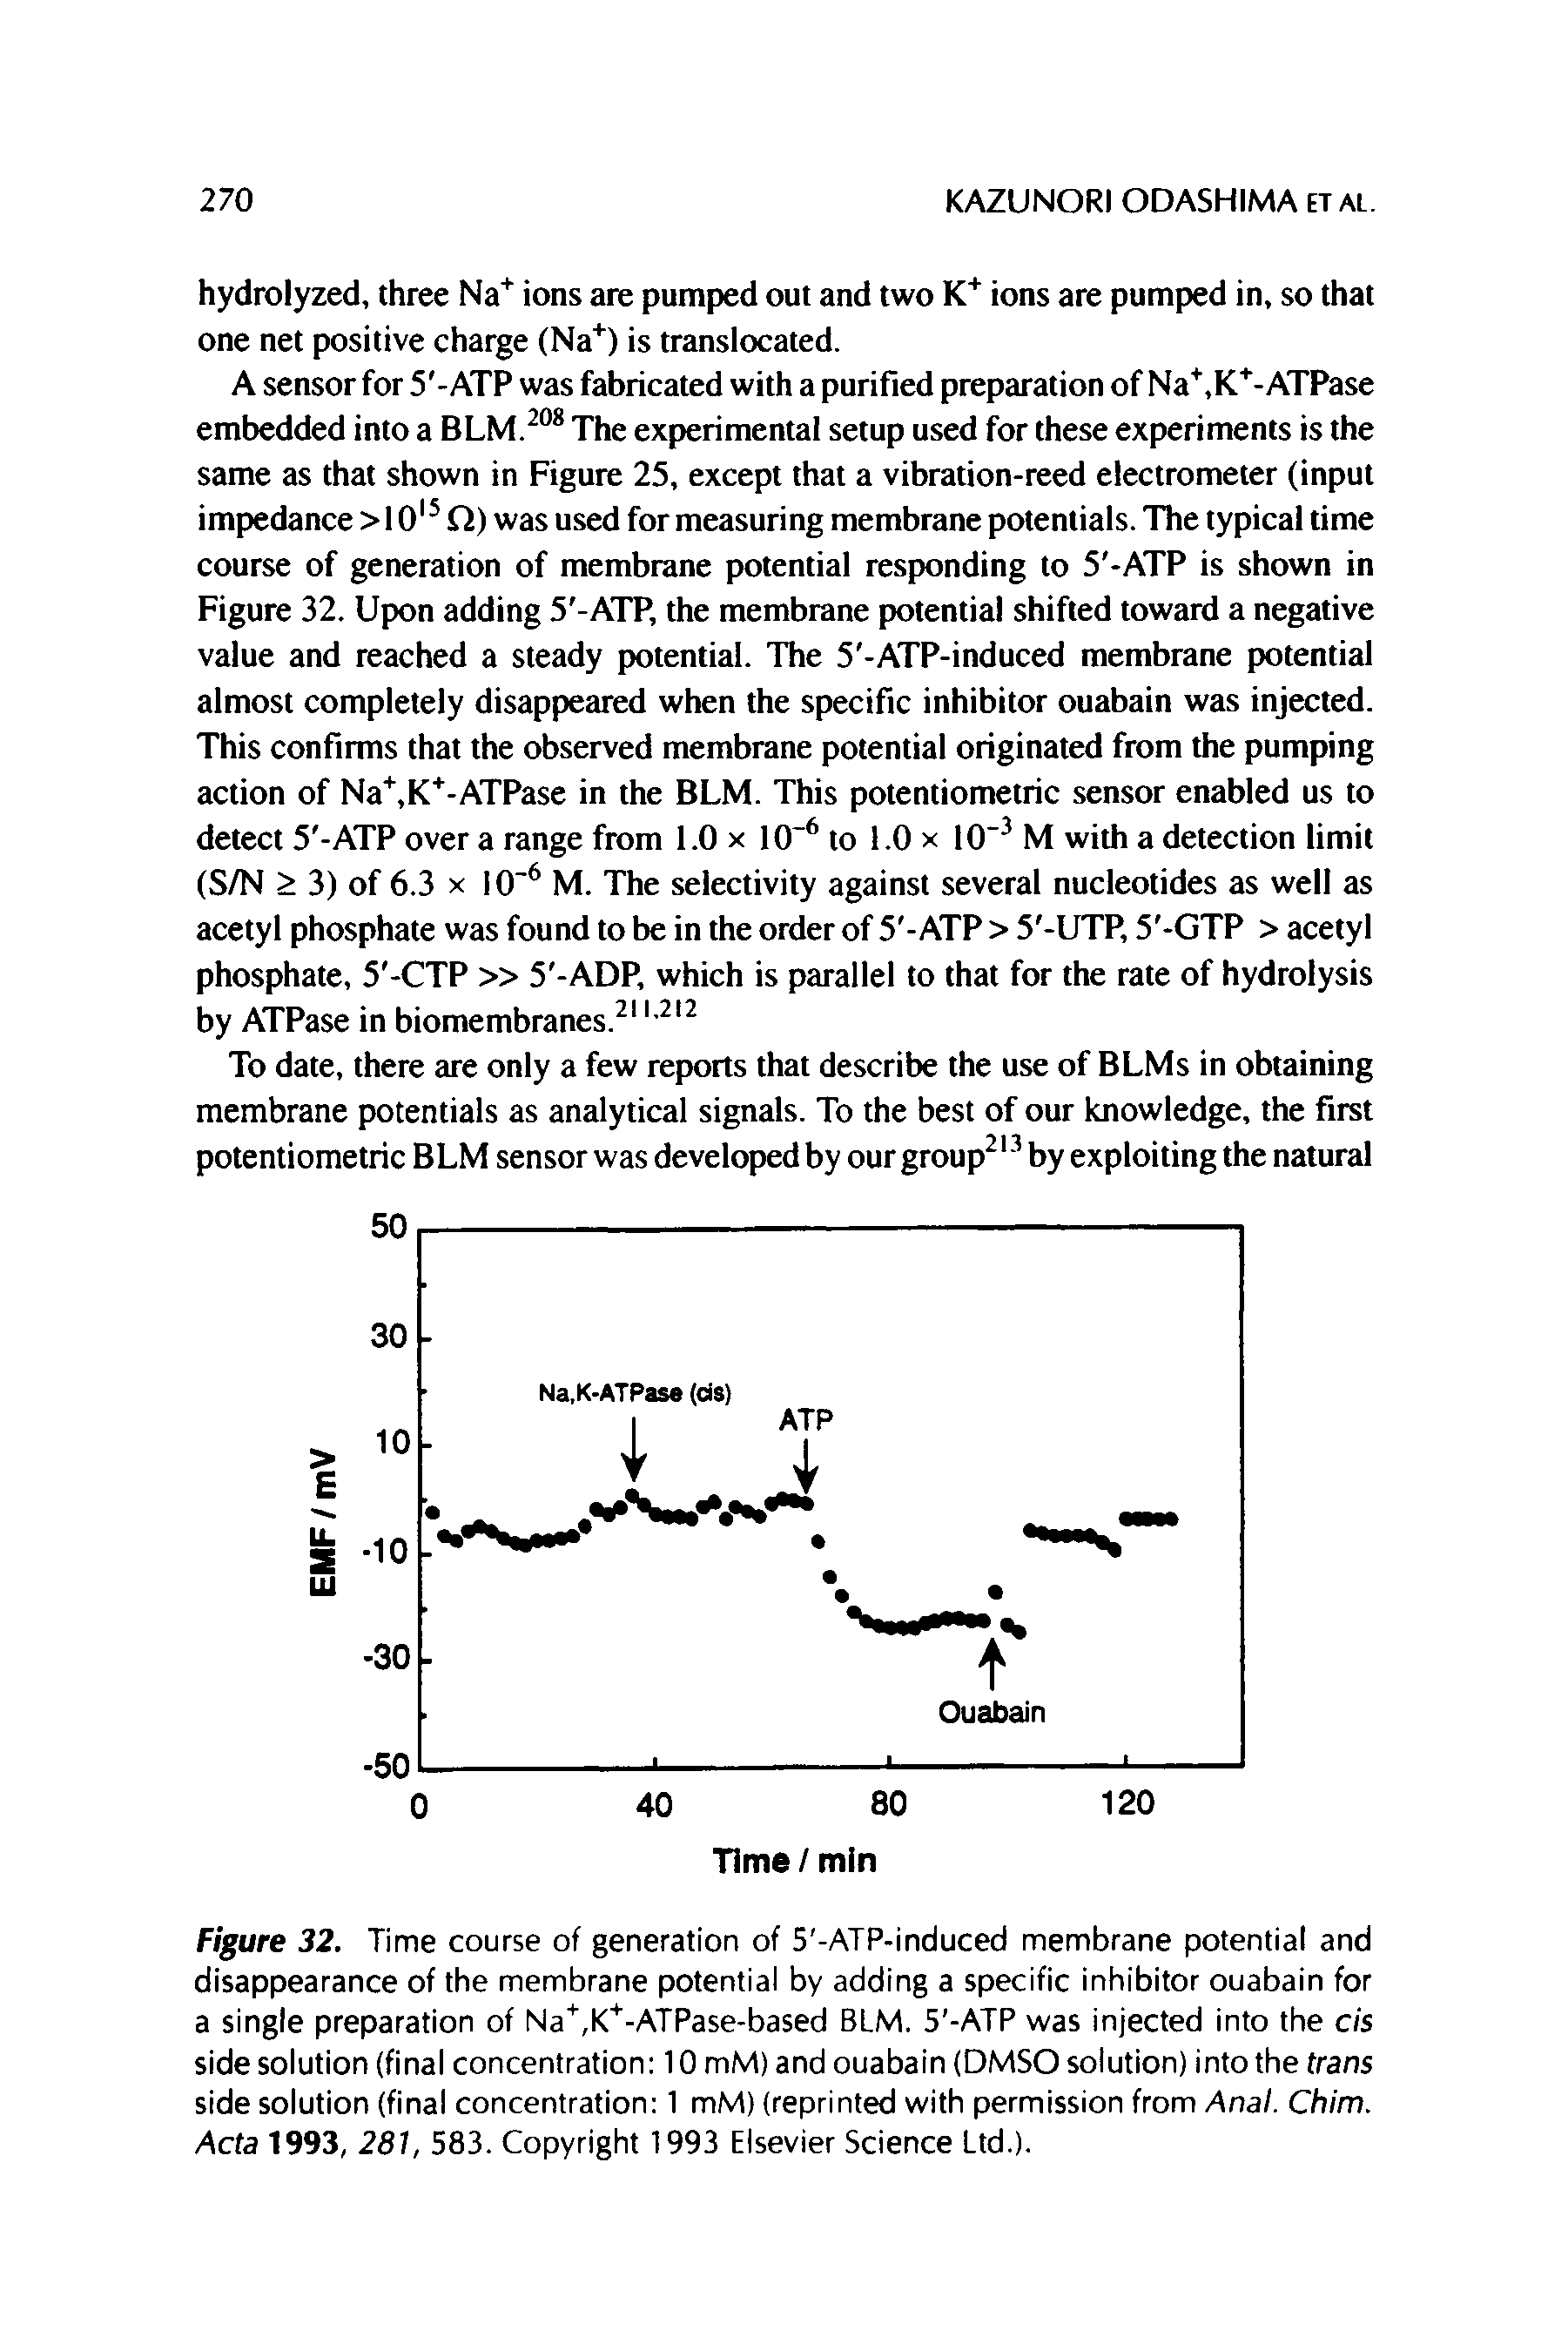 Figure 32. Time course of generation of 5 -ATP-induced membrane potential and disappearance of the membrane potential by adding a specific inhibitor ouabain for a single preparation of Na, K -ATPase-based BLM. 5 -ATP was injected into the cis side solution (final concentration 10 mM) and ouabain (DMSO solution) into the trans side solution (final concentration 1 mM) (reprinted with permission from Anal. Chim. Acta 1993, 281, 583. Copyright 1993 Elsevier Science Ltd.).